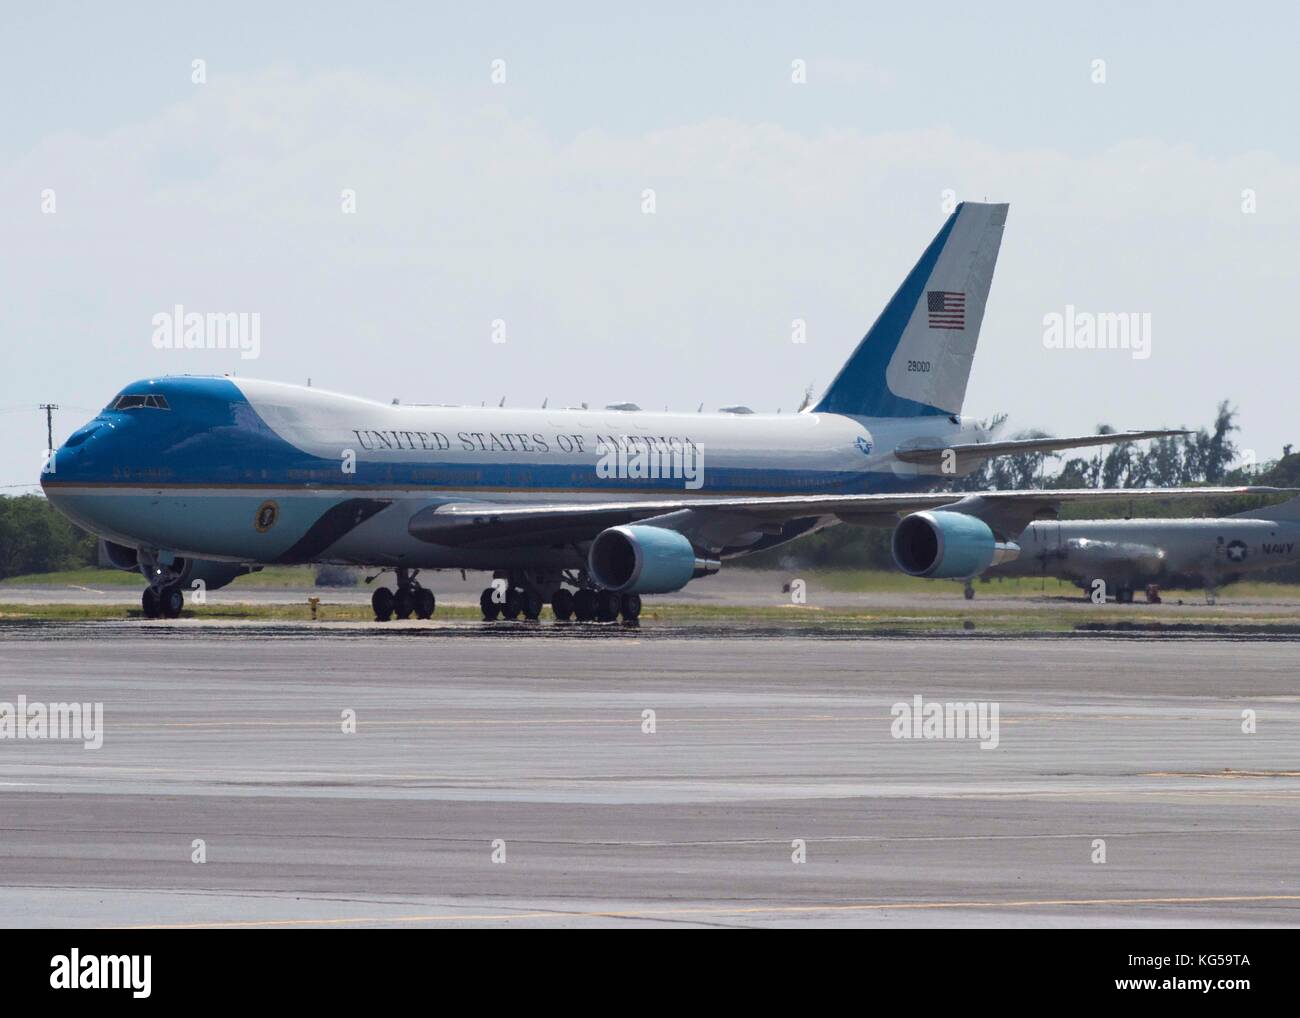 171103-N-QE566-002 Air Force One lands on Joint Base Pearl Harbor-Hickam  Nov. 3. President Donald J. Trump is in Hawaii to receive a briefing from  USPACOM prior to traveling to Japan, the Republic of Korea, China, Vietnam  and the Philippines from ...